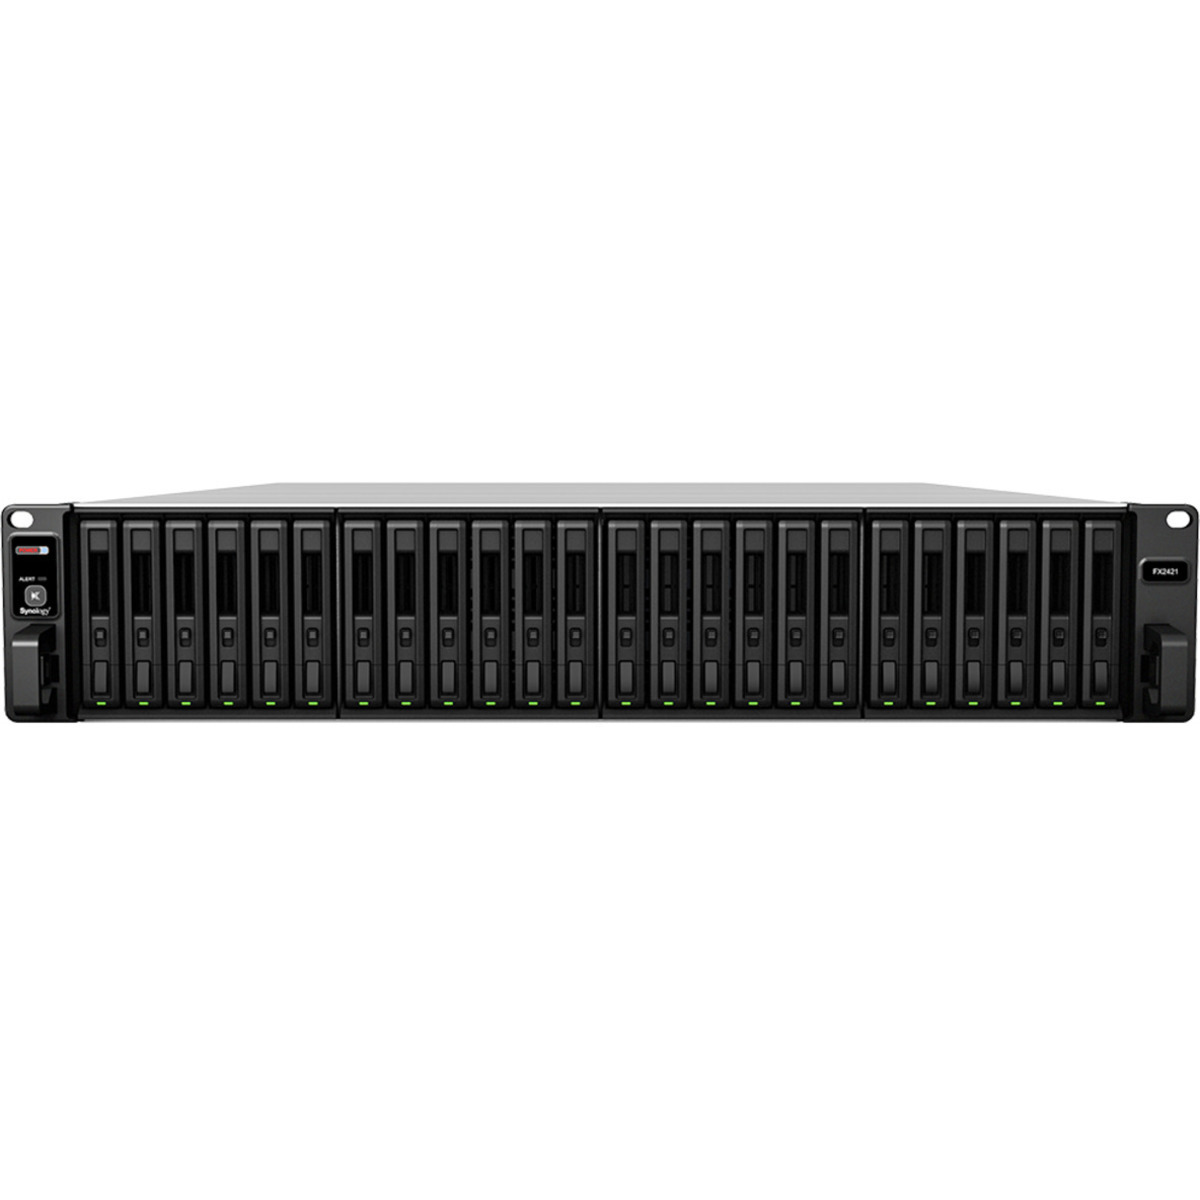 Synology FX2421 External Expansion Drive 72tb 24-Bay RackMount Large Business / Enterprise Expansion Enclosure 18x4tb Samsung 870 EVO MZ-77E4T0BAM 2.5 560/530MB/s SATA 6Gb/s SSD CONSUMER Class Drives Installed - Burn-In Tested - ON SALE FX2421 External Expansion Drive